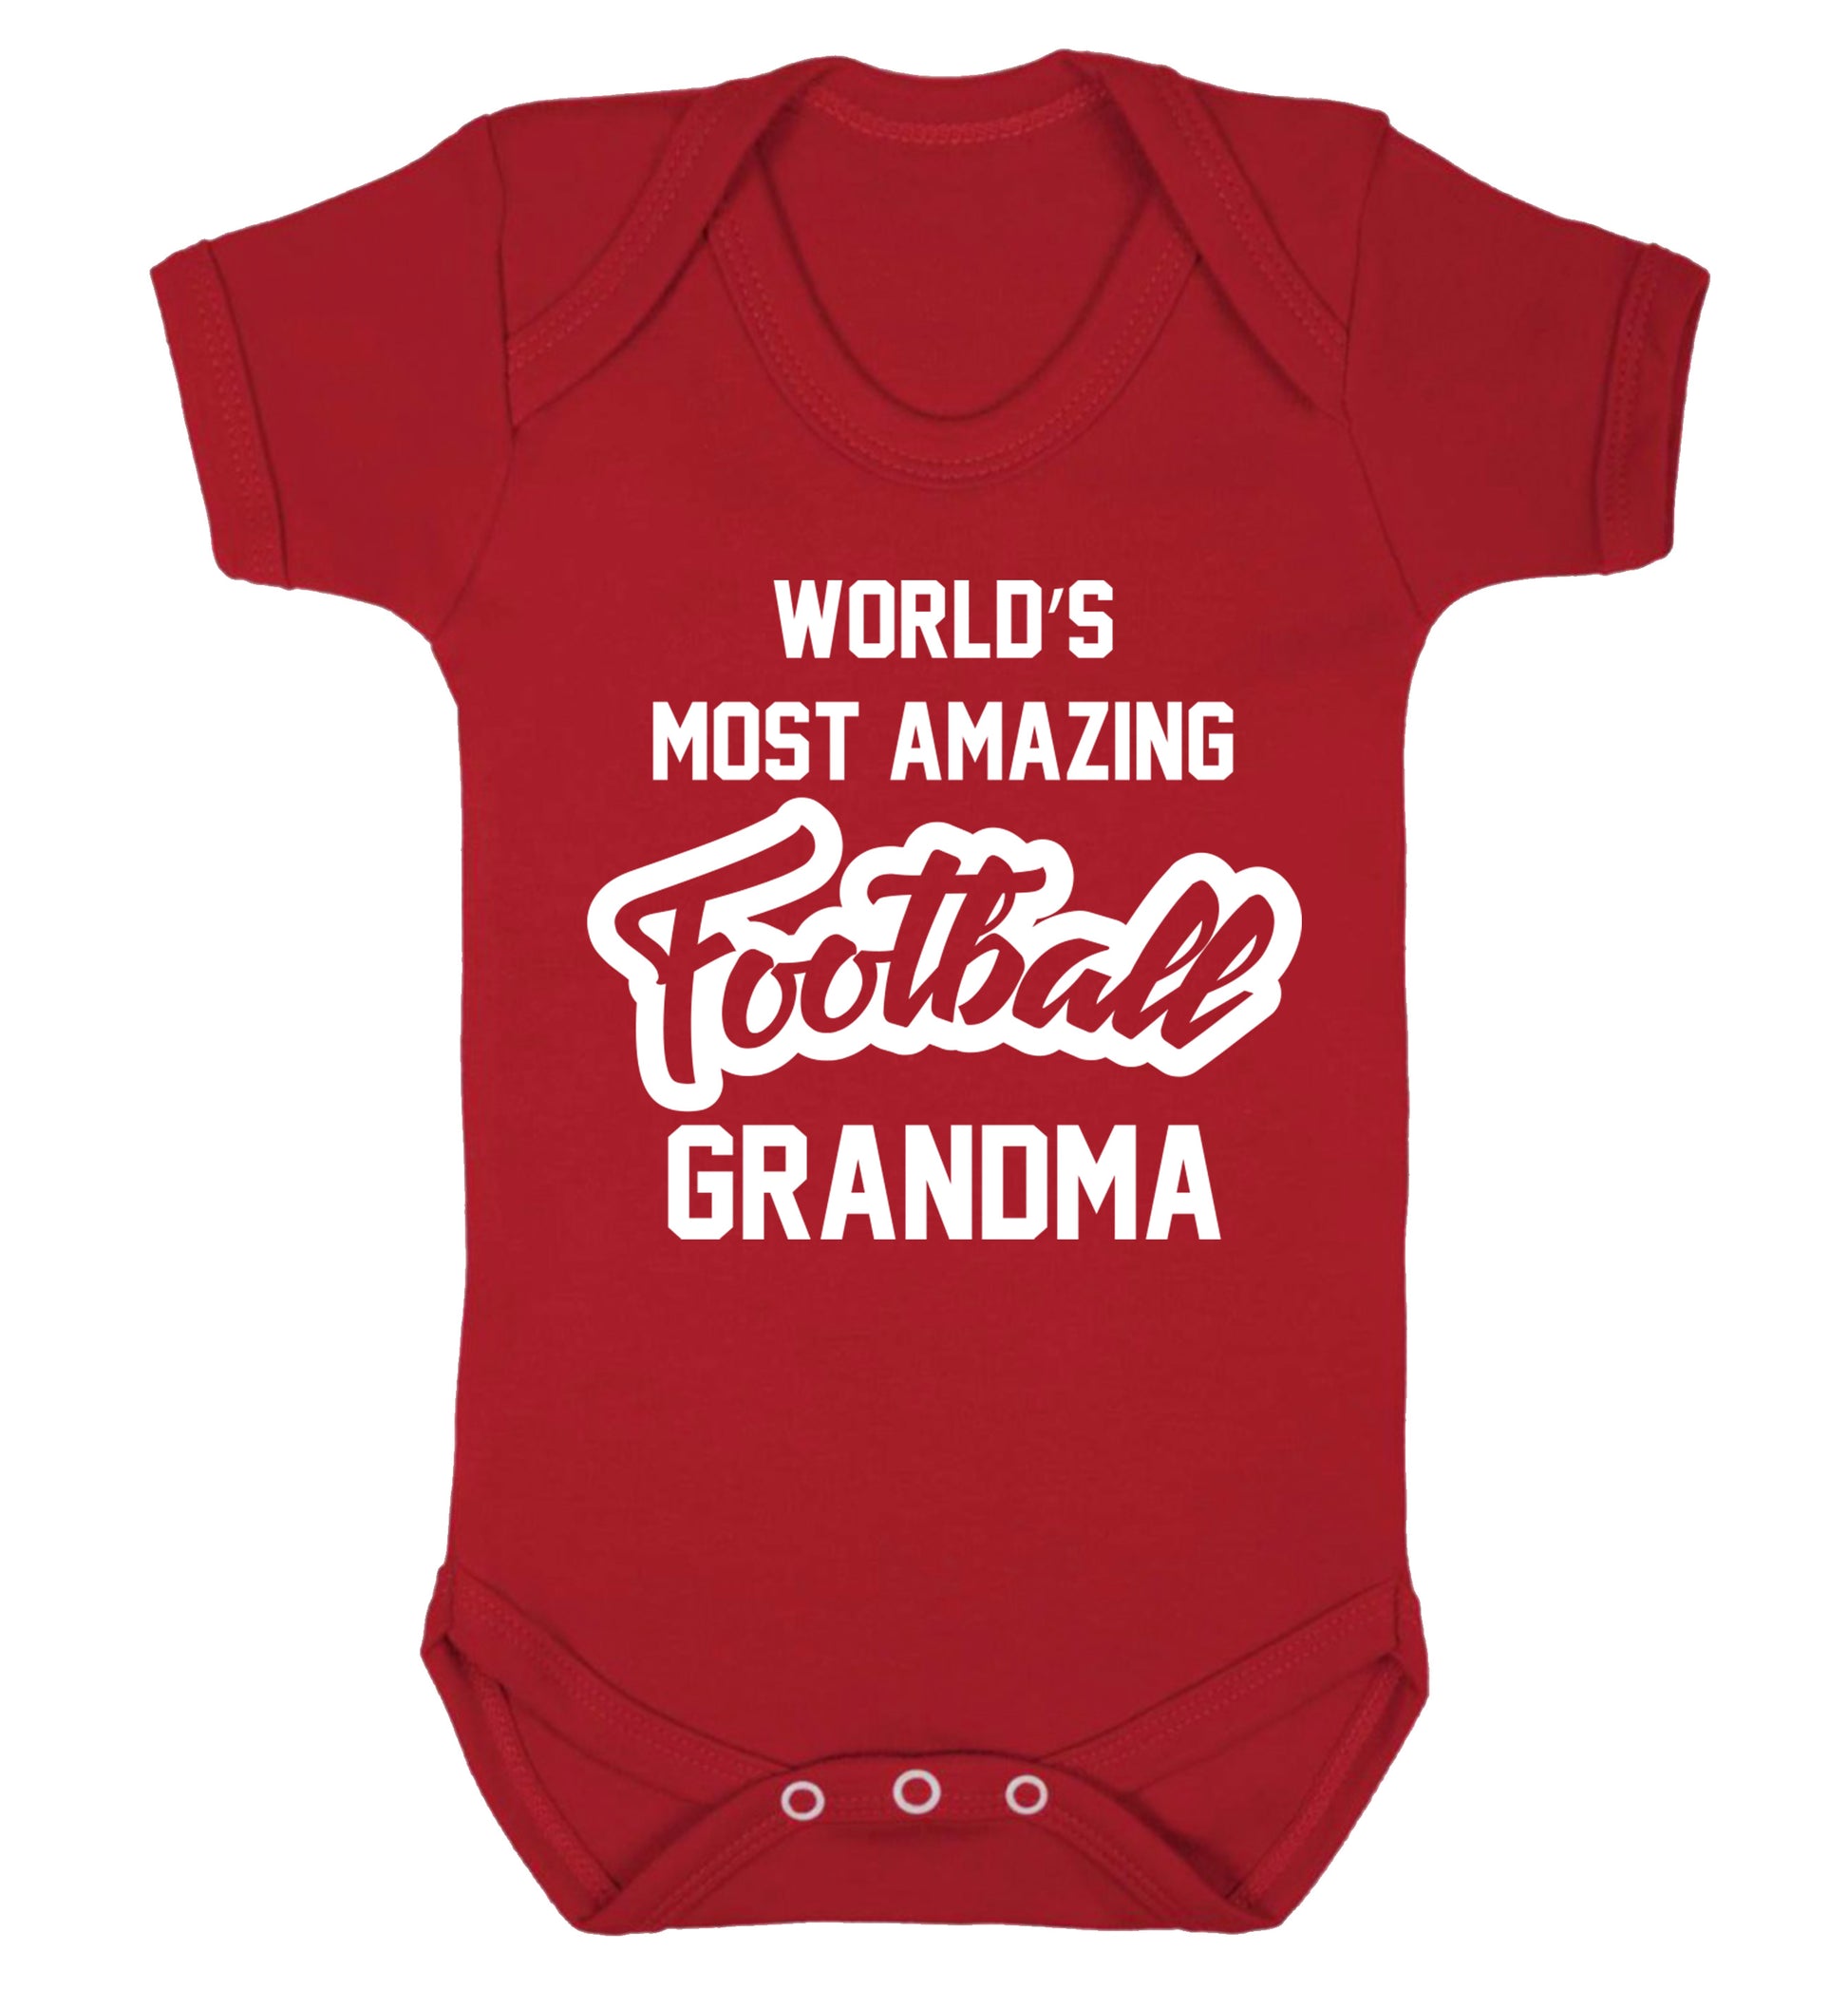 Worlds most amazing football grandma Baby Vest red 18-24 months